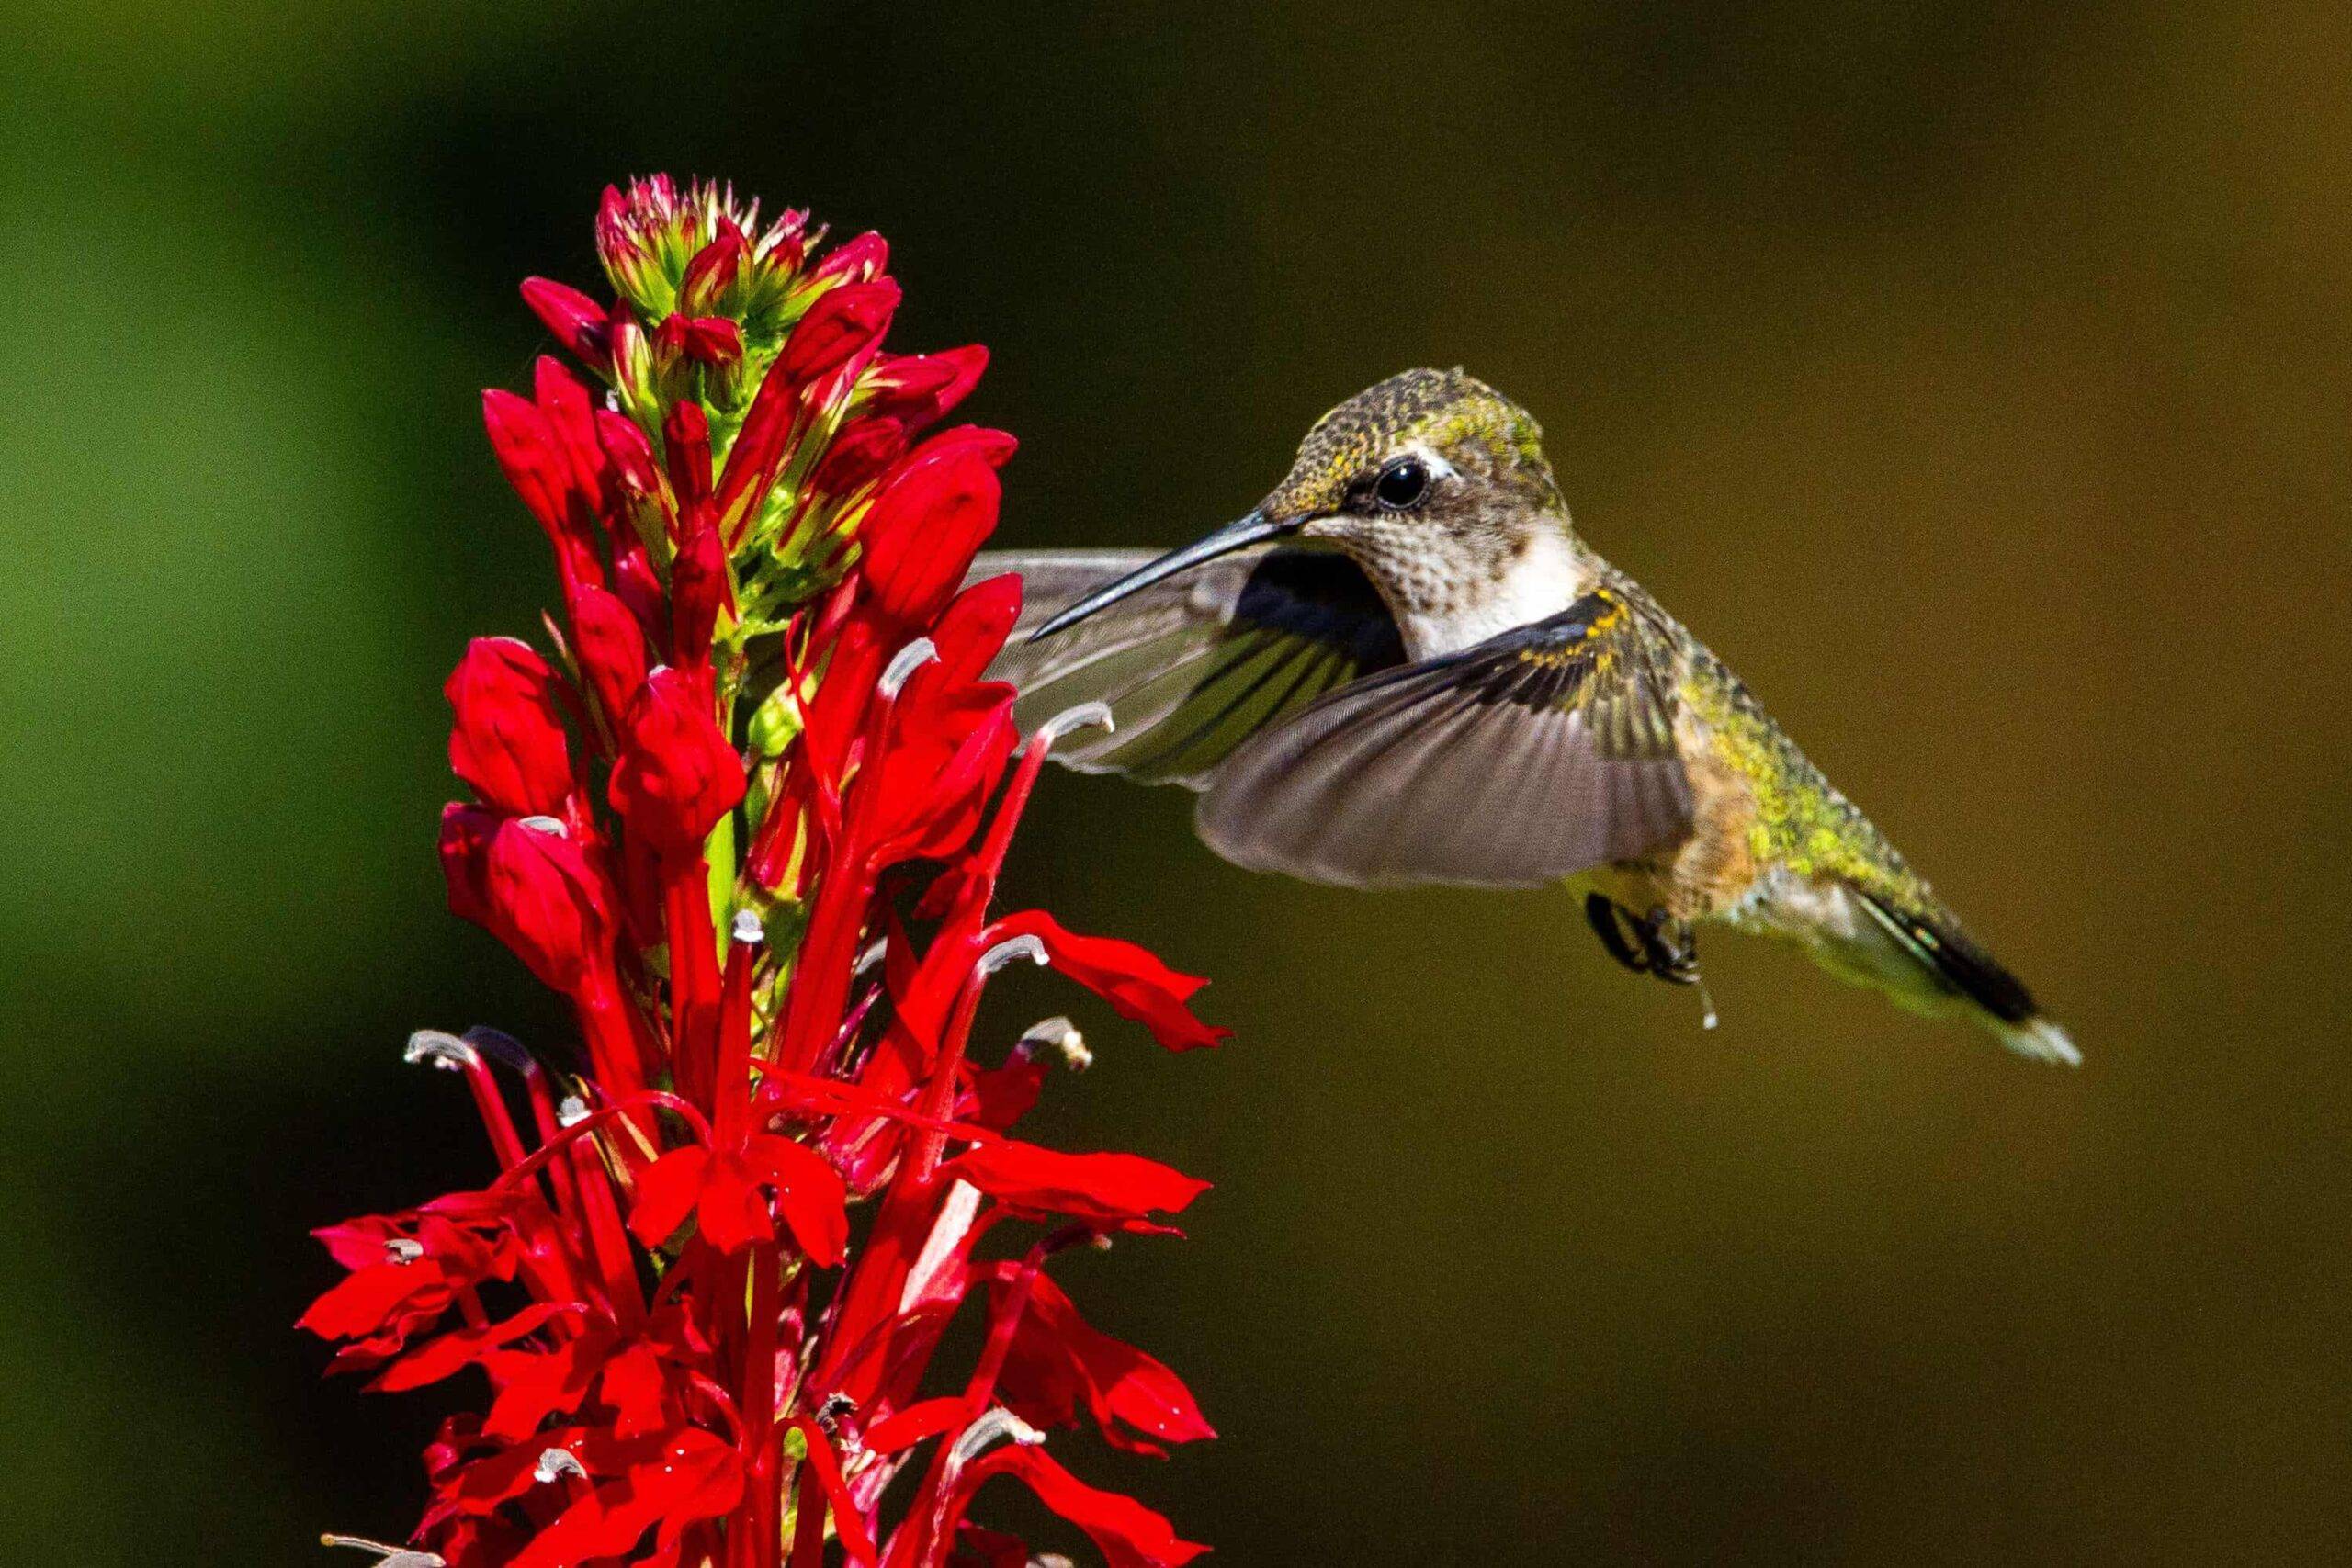 A ruby-throated hummingbird hovers next to a cardinal flower.